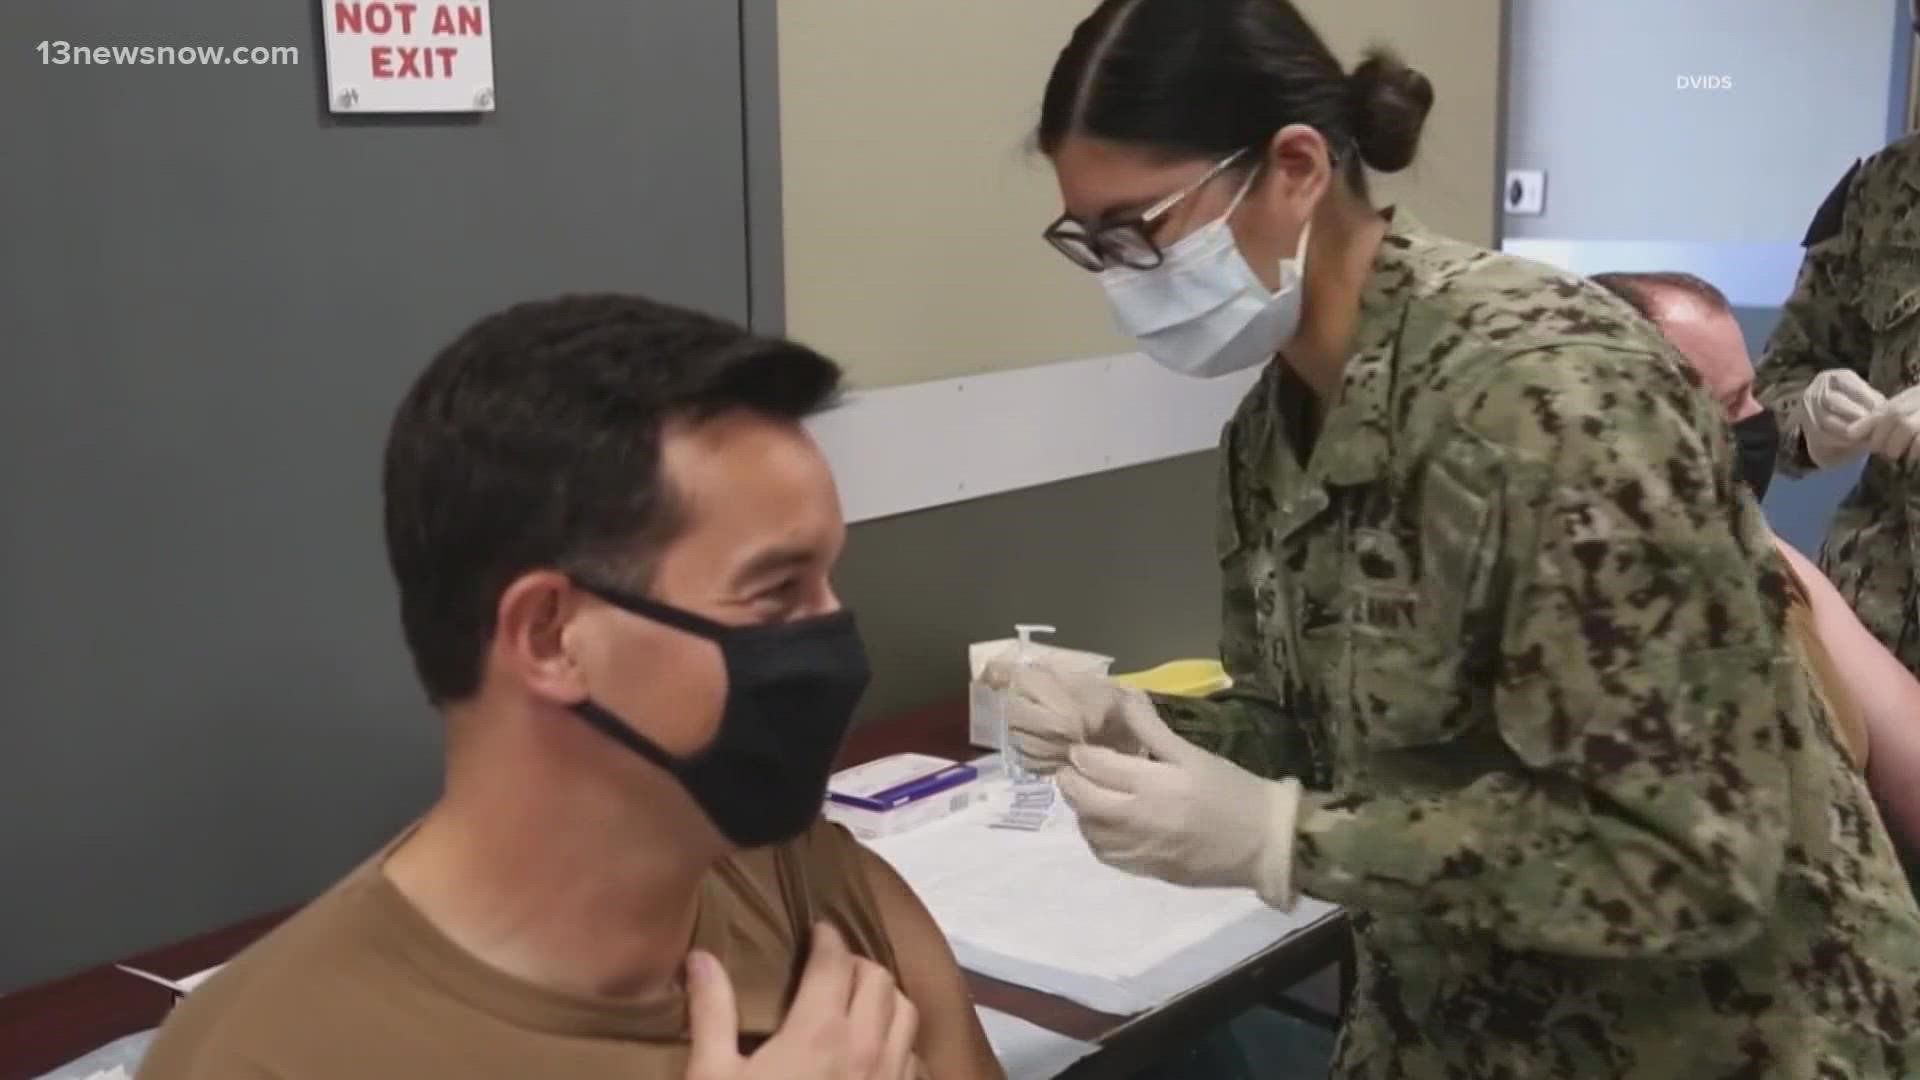 More than 800,000 service members have yet to get their shots, according to Pentagon data.